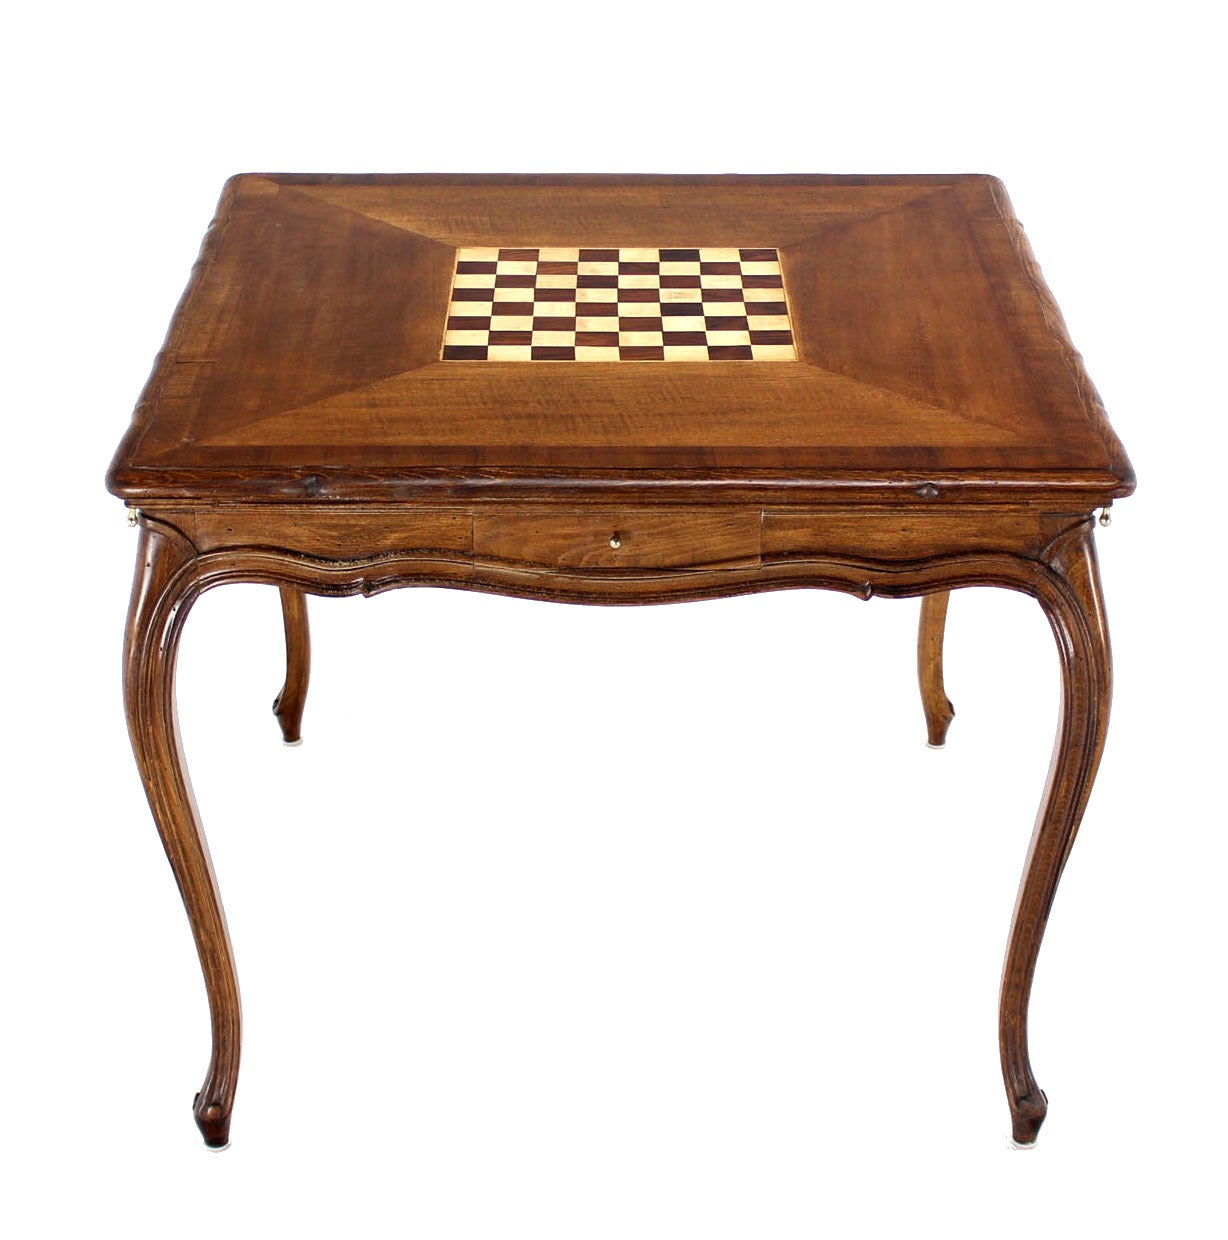 Very nice quality game table with built-in chess board.